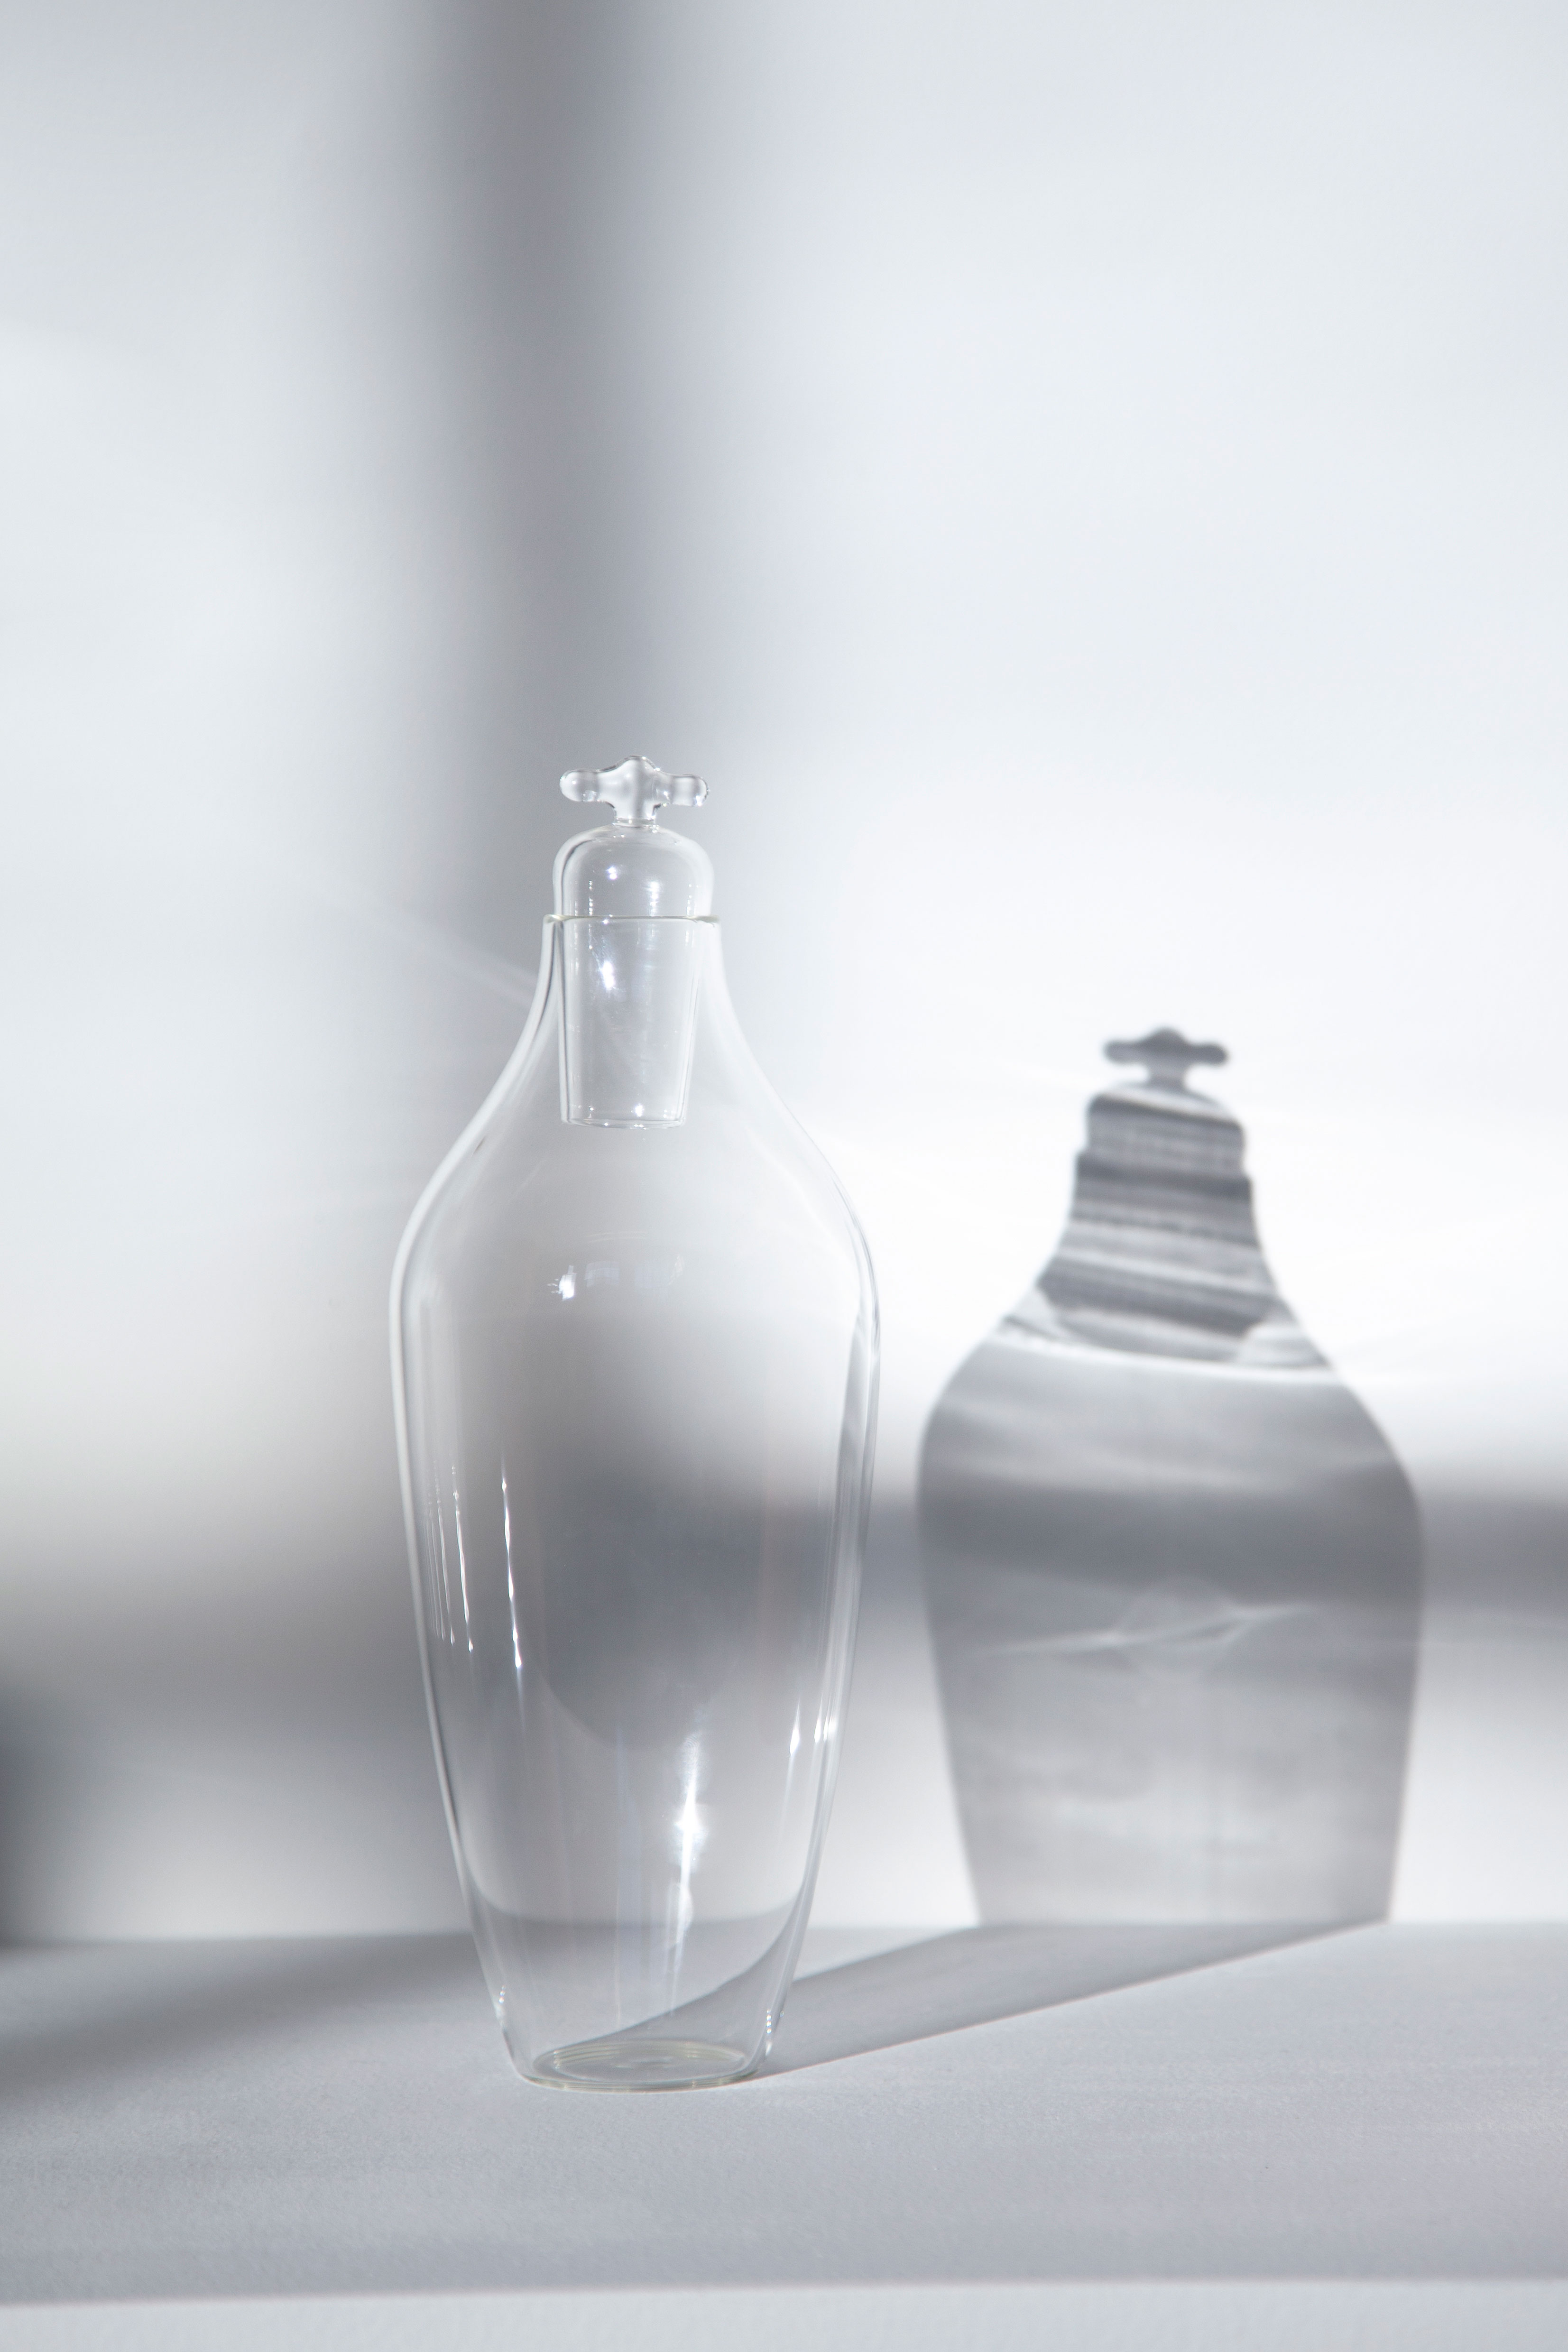 Tap Water Carafe in glas Image by Vij5 2022 WEB scaled